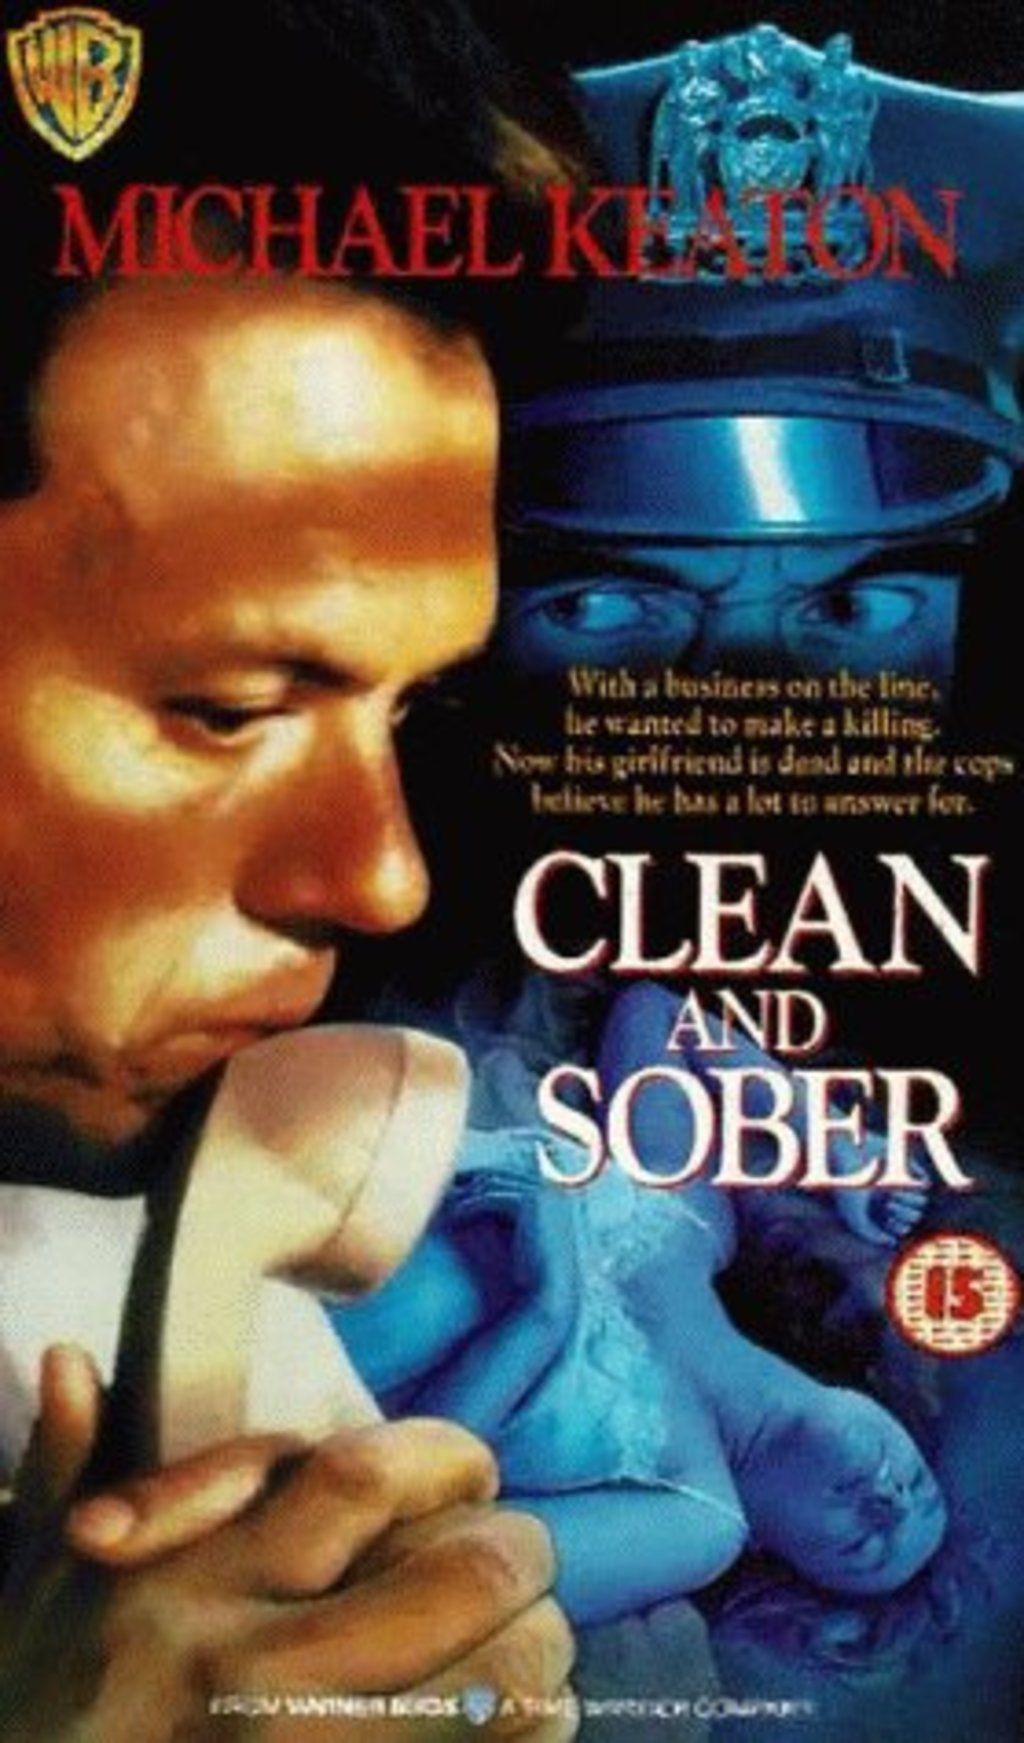 Watch Clean And Sober On Netflix Today Netflixmovies Com